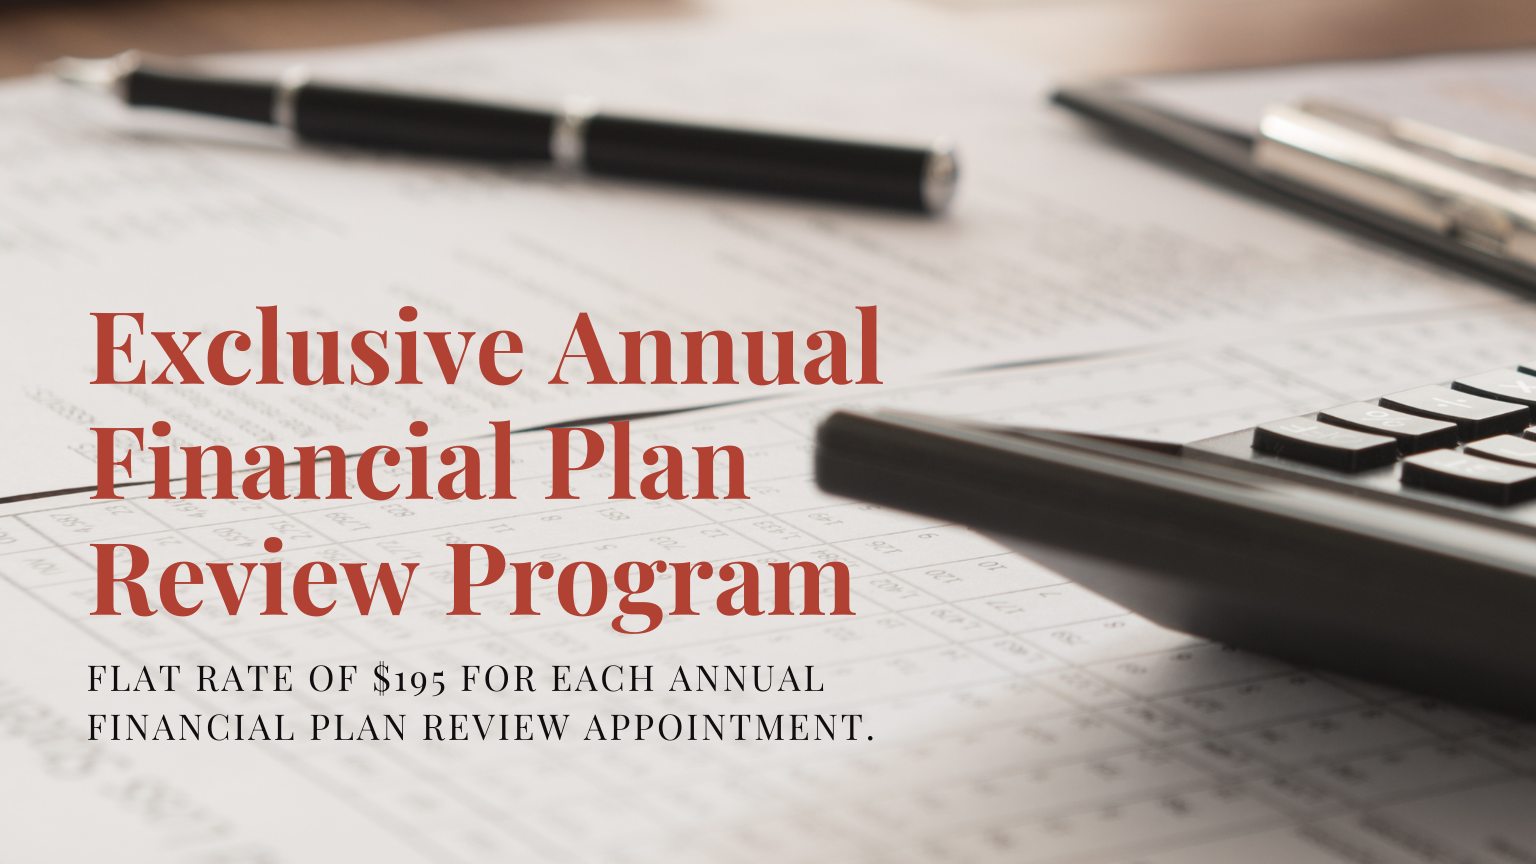 Exclusive annual financial plan review program.